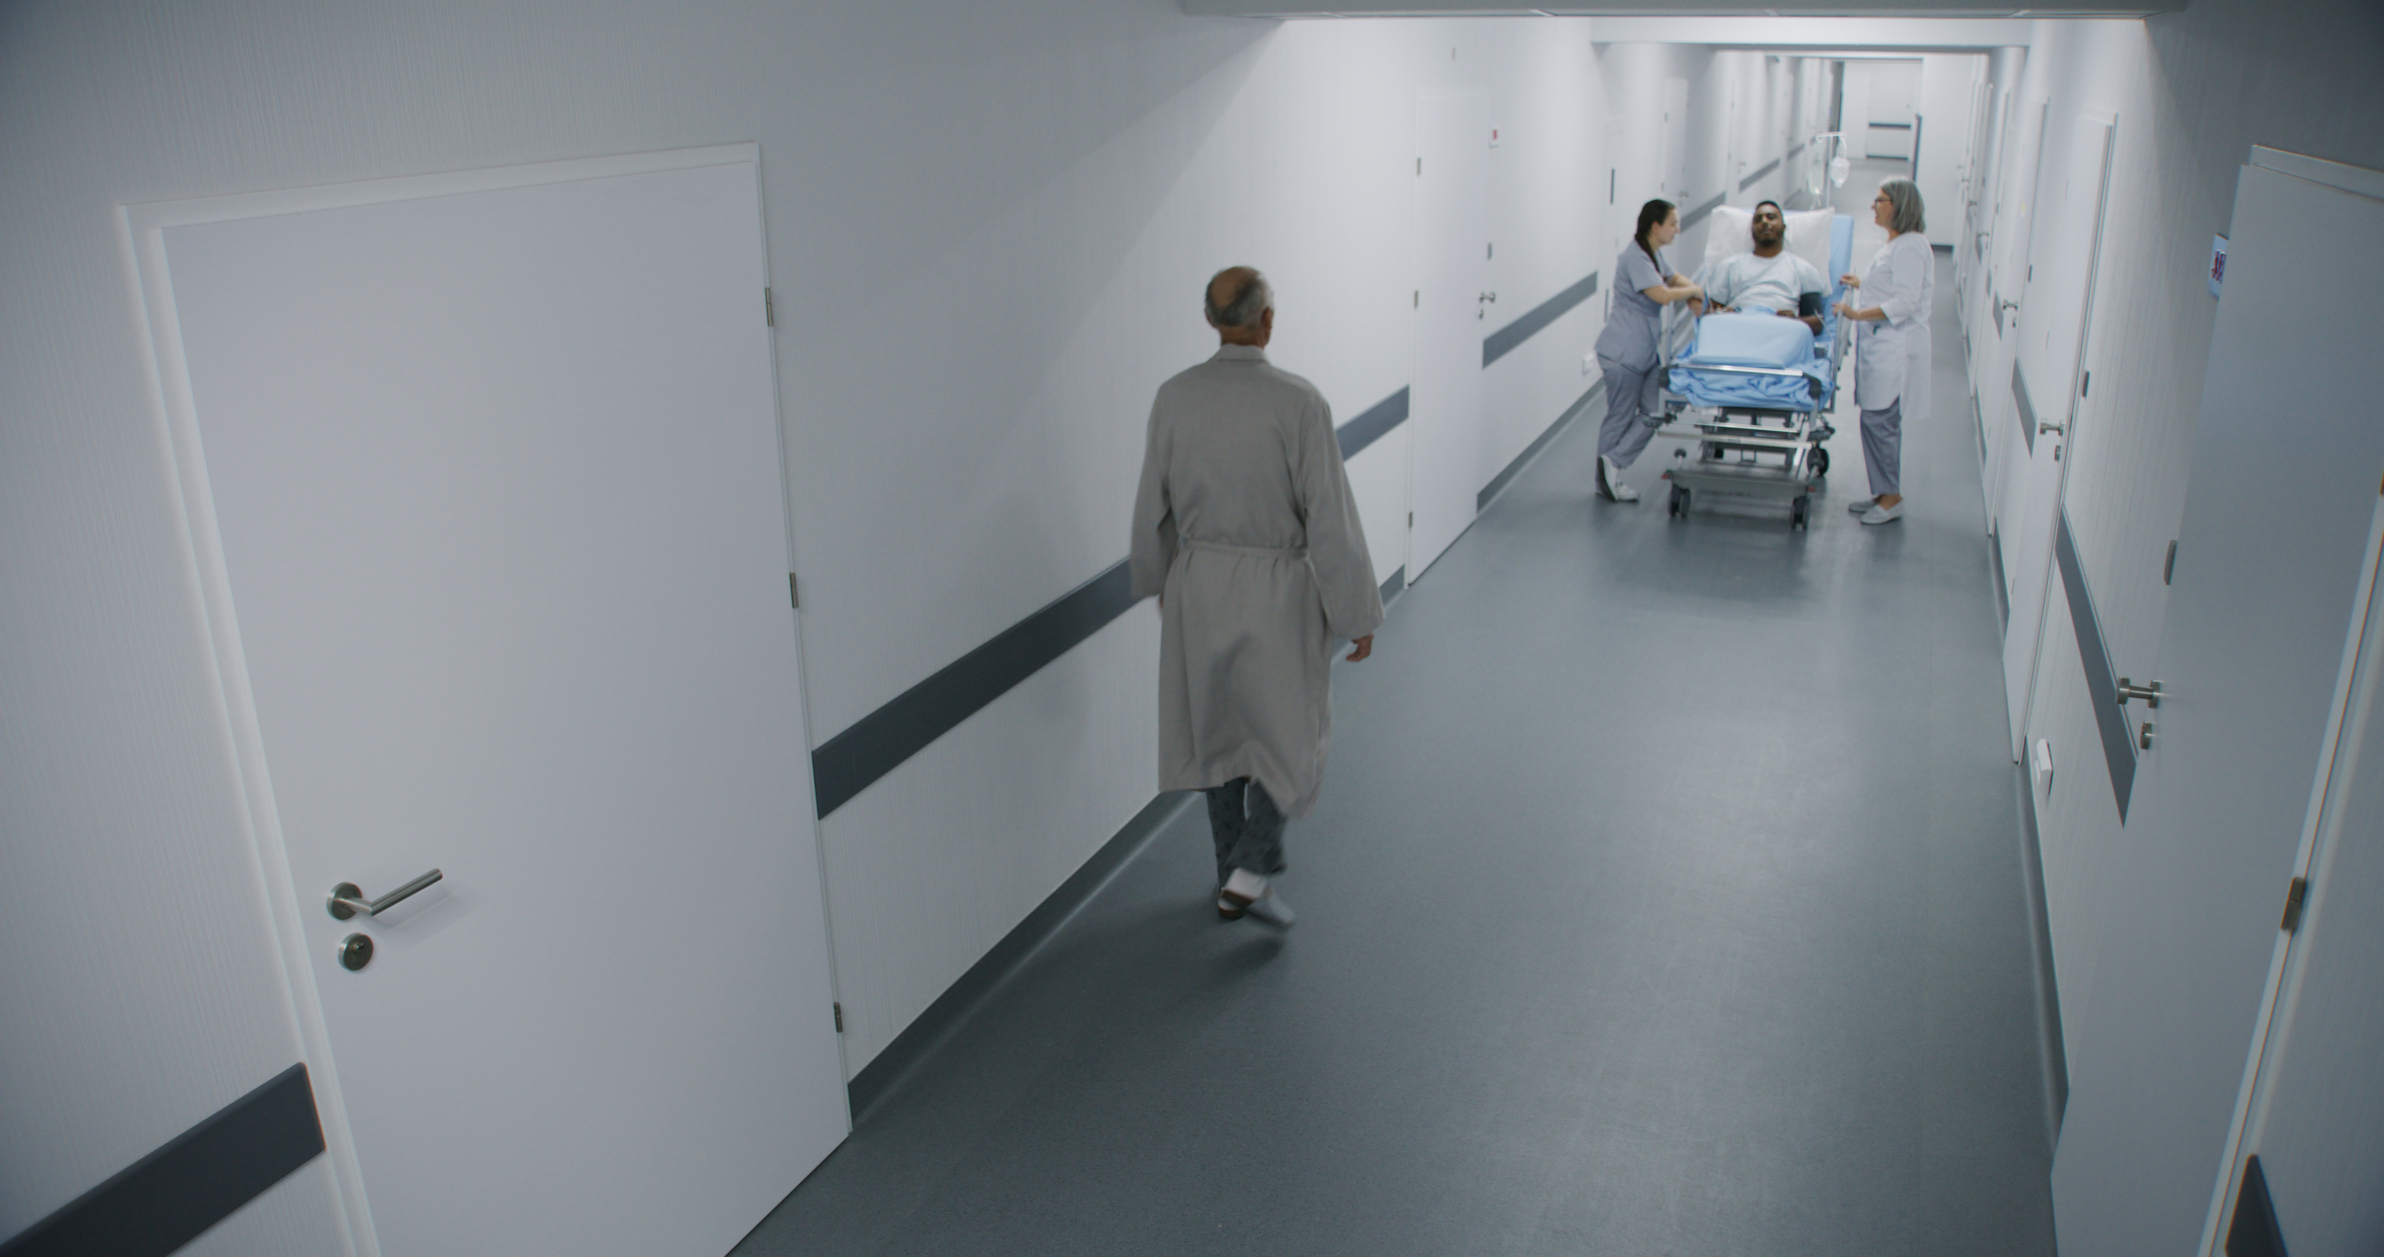 security camera view of patients in a hospital hallways